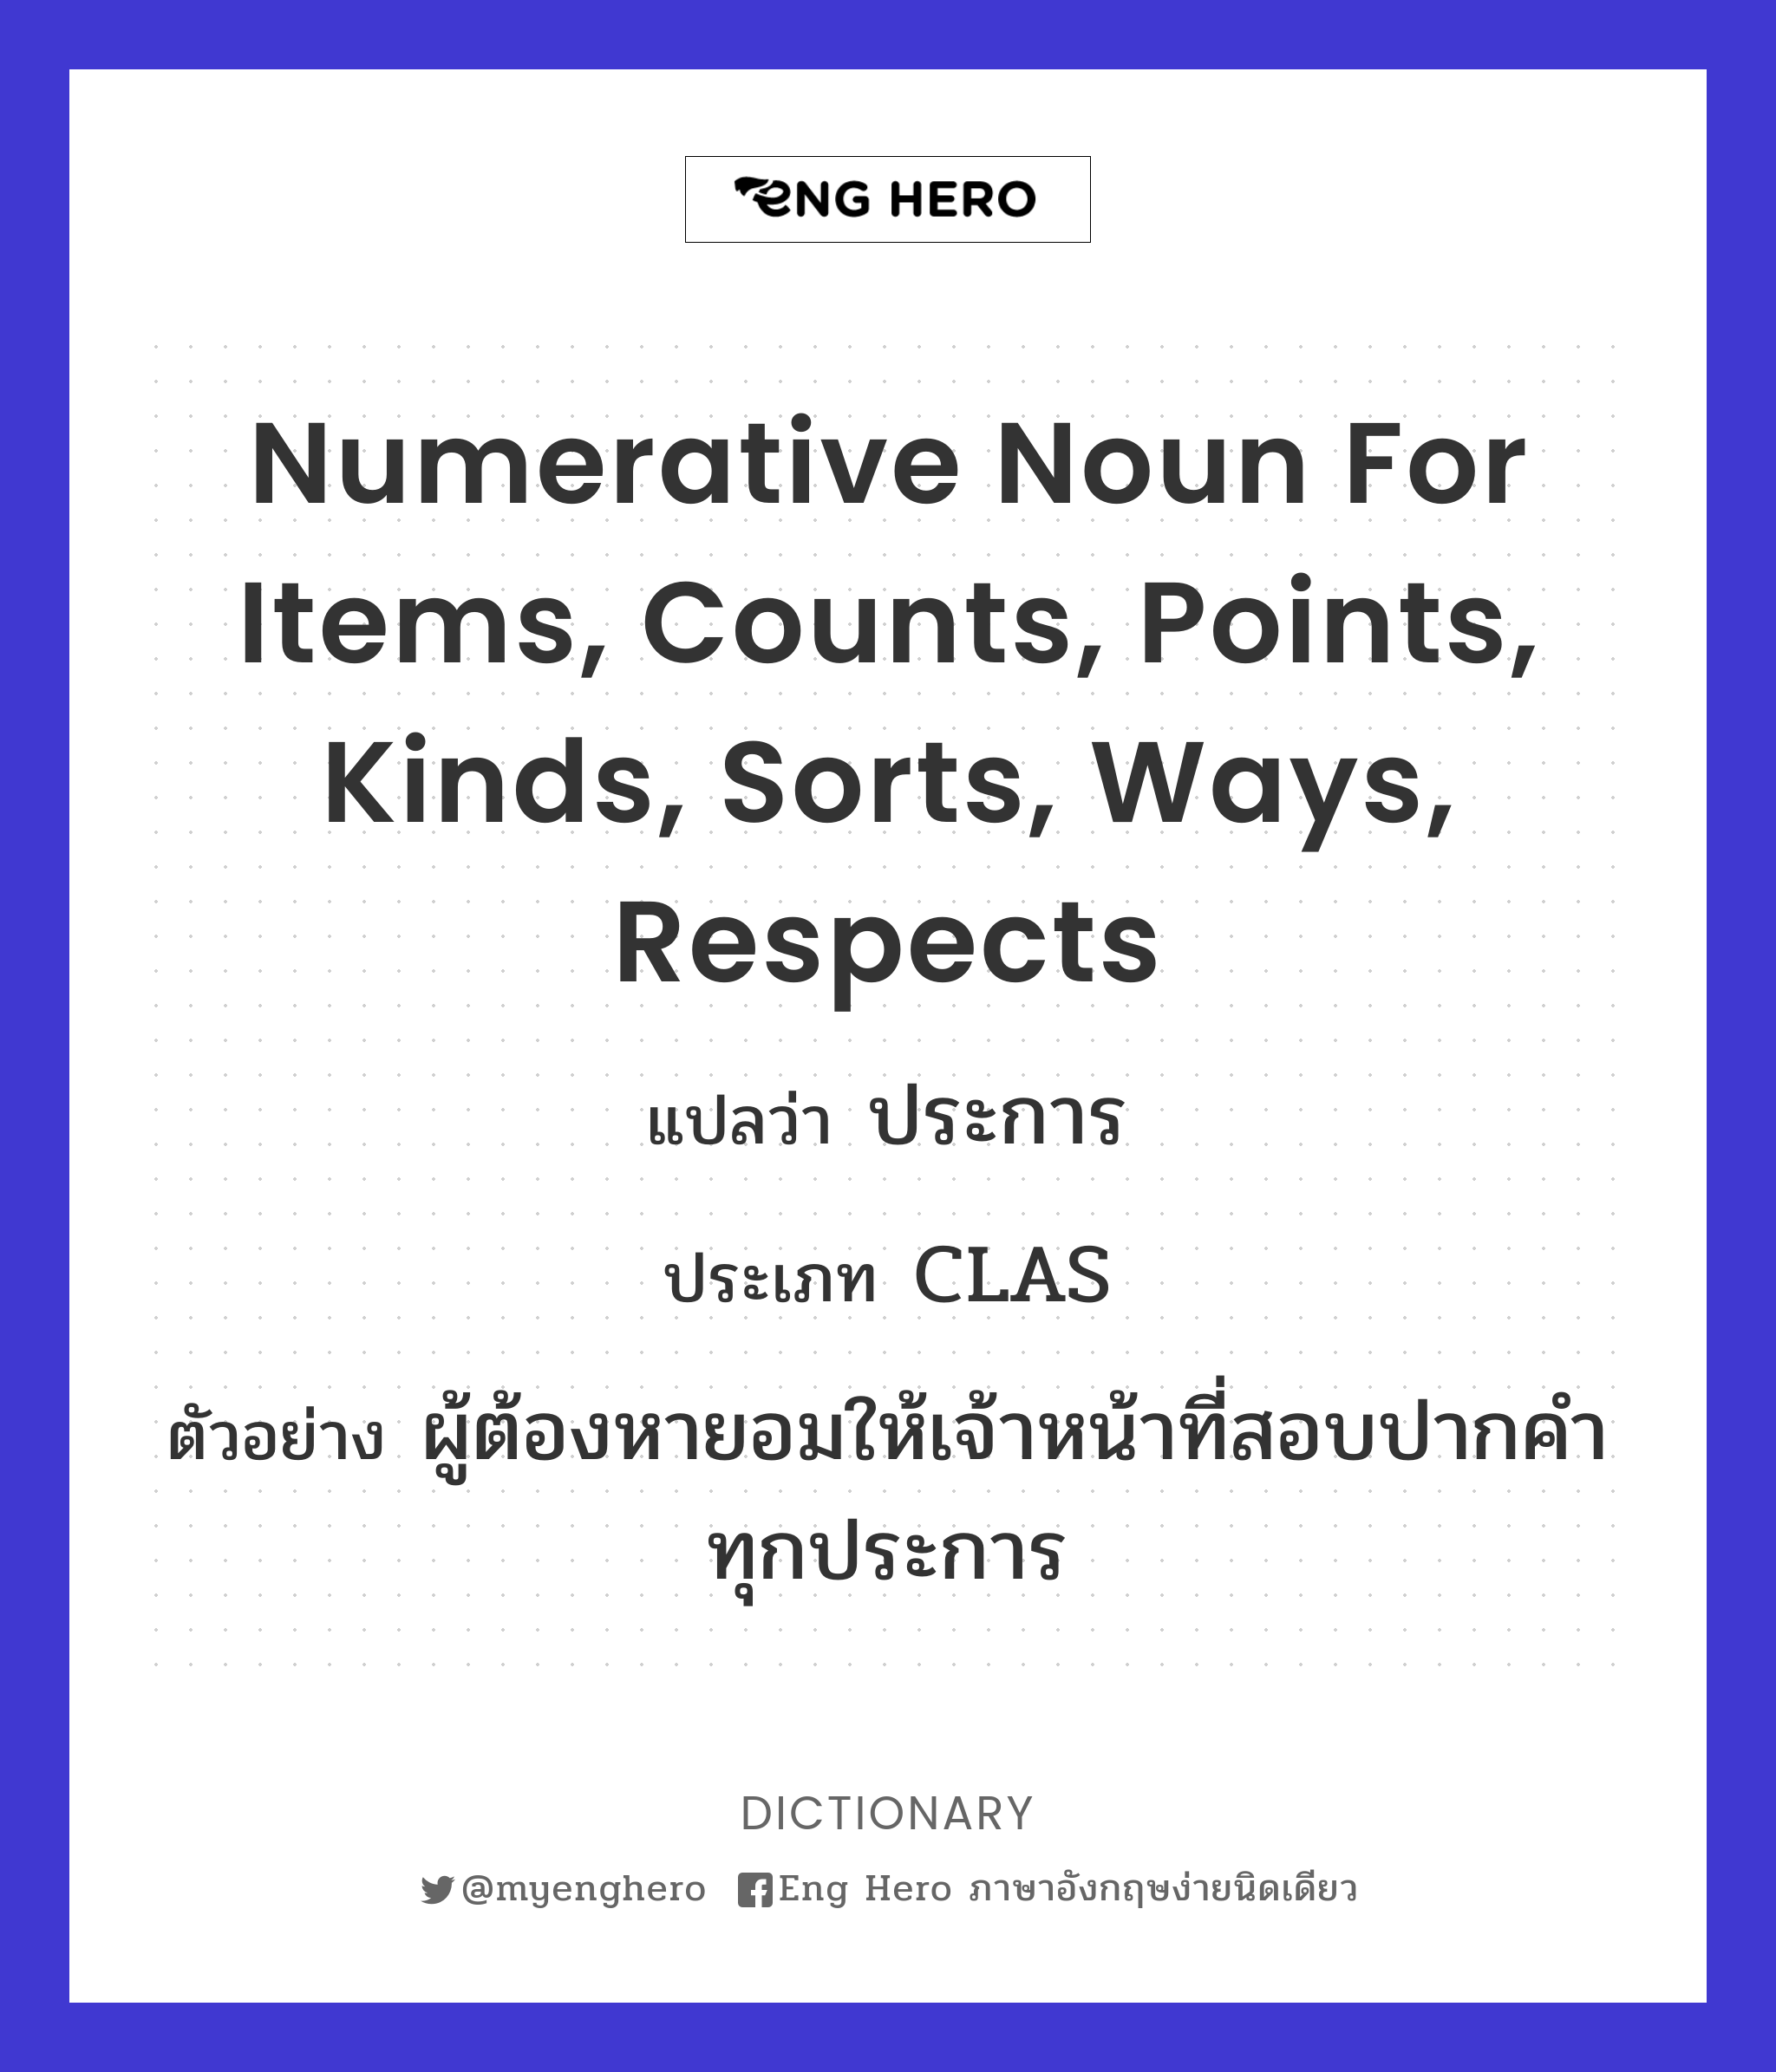 numerative noun for items, counts, points, kinds, sorts, ways, respects